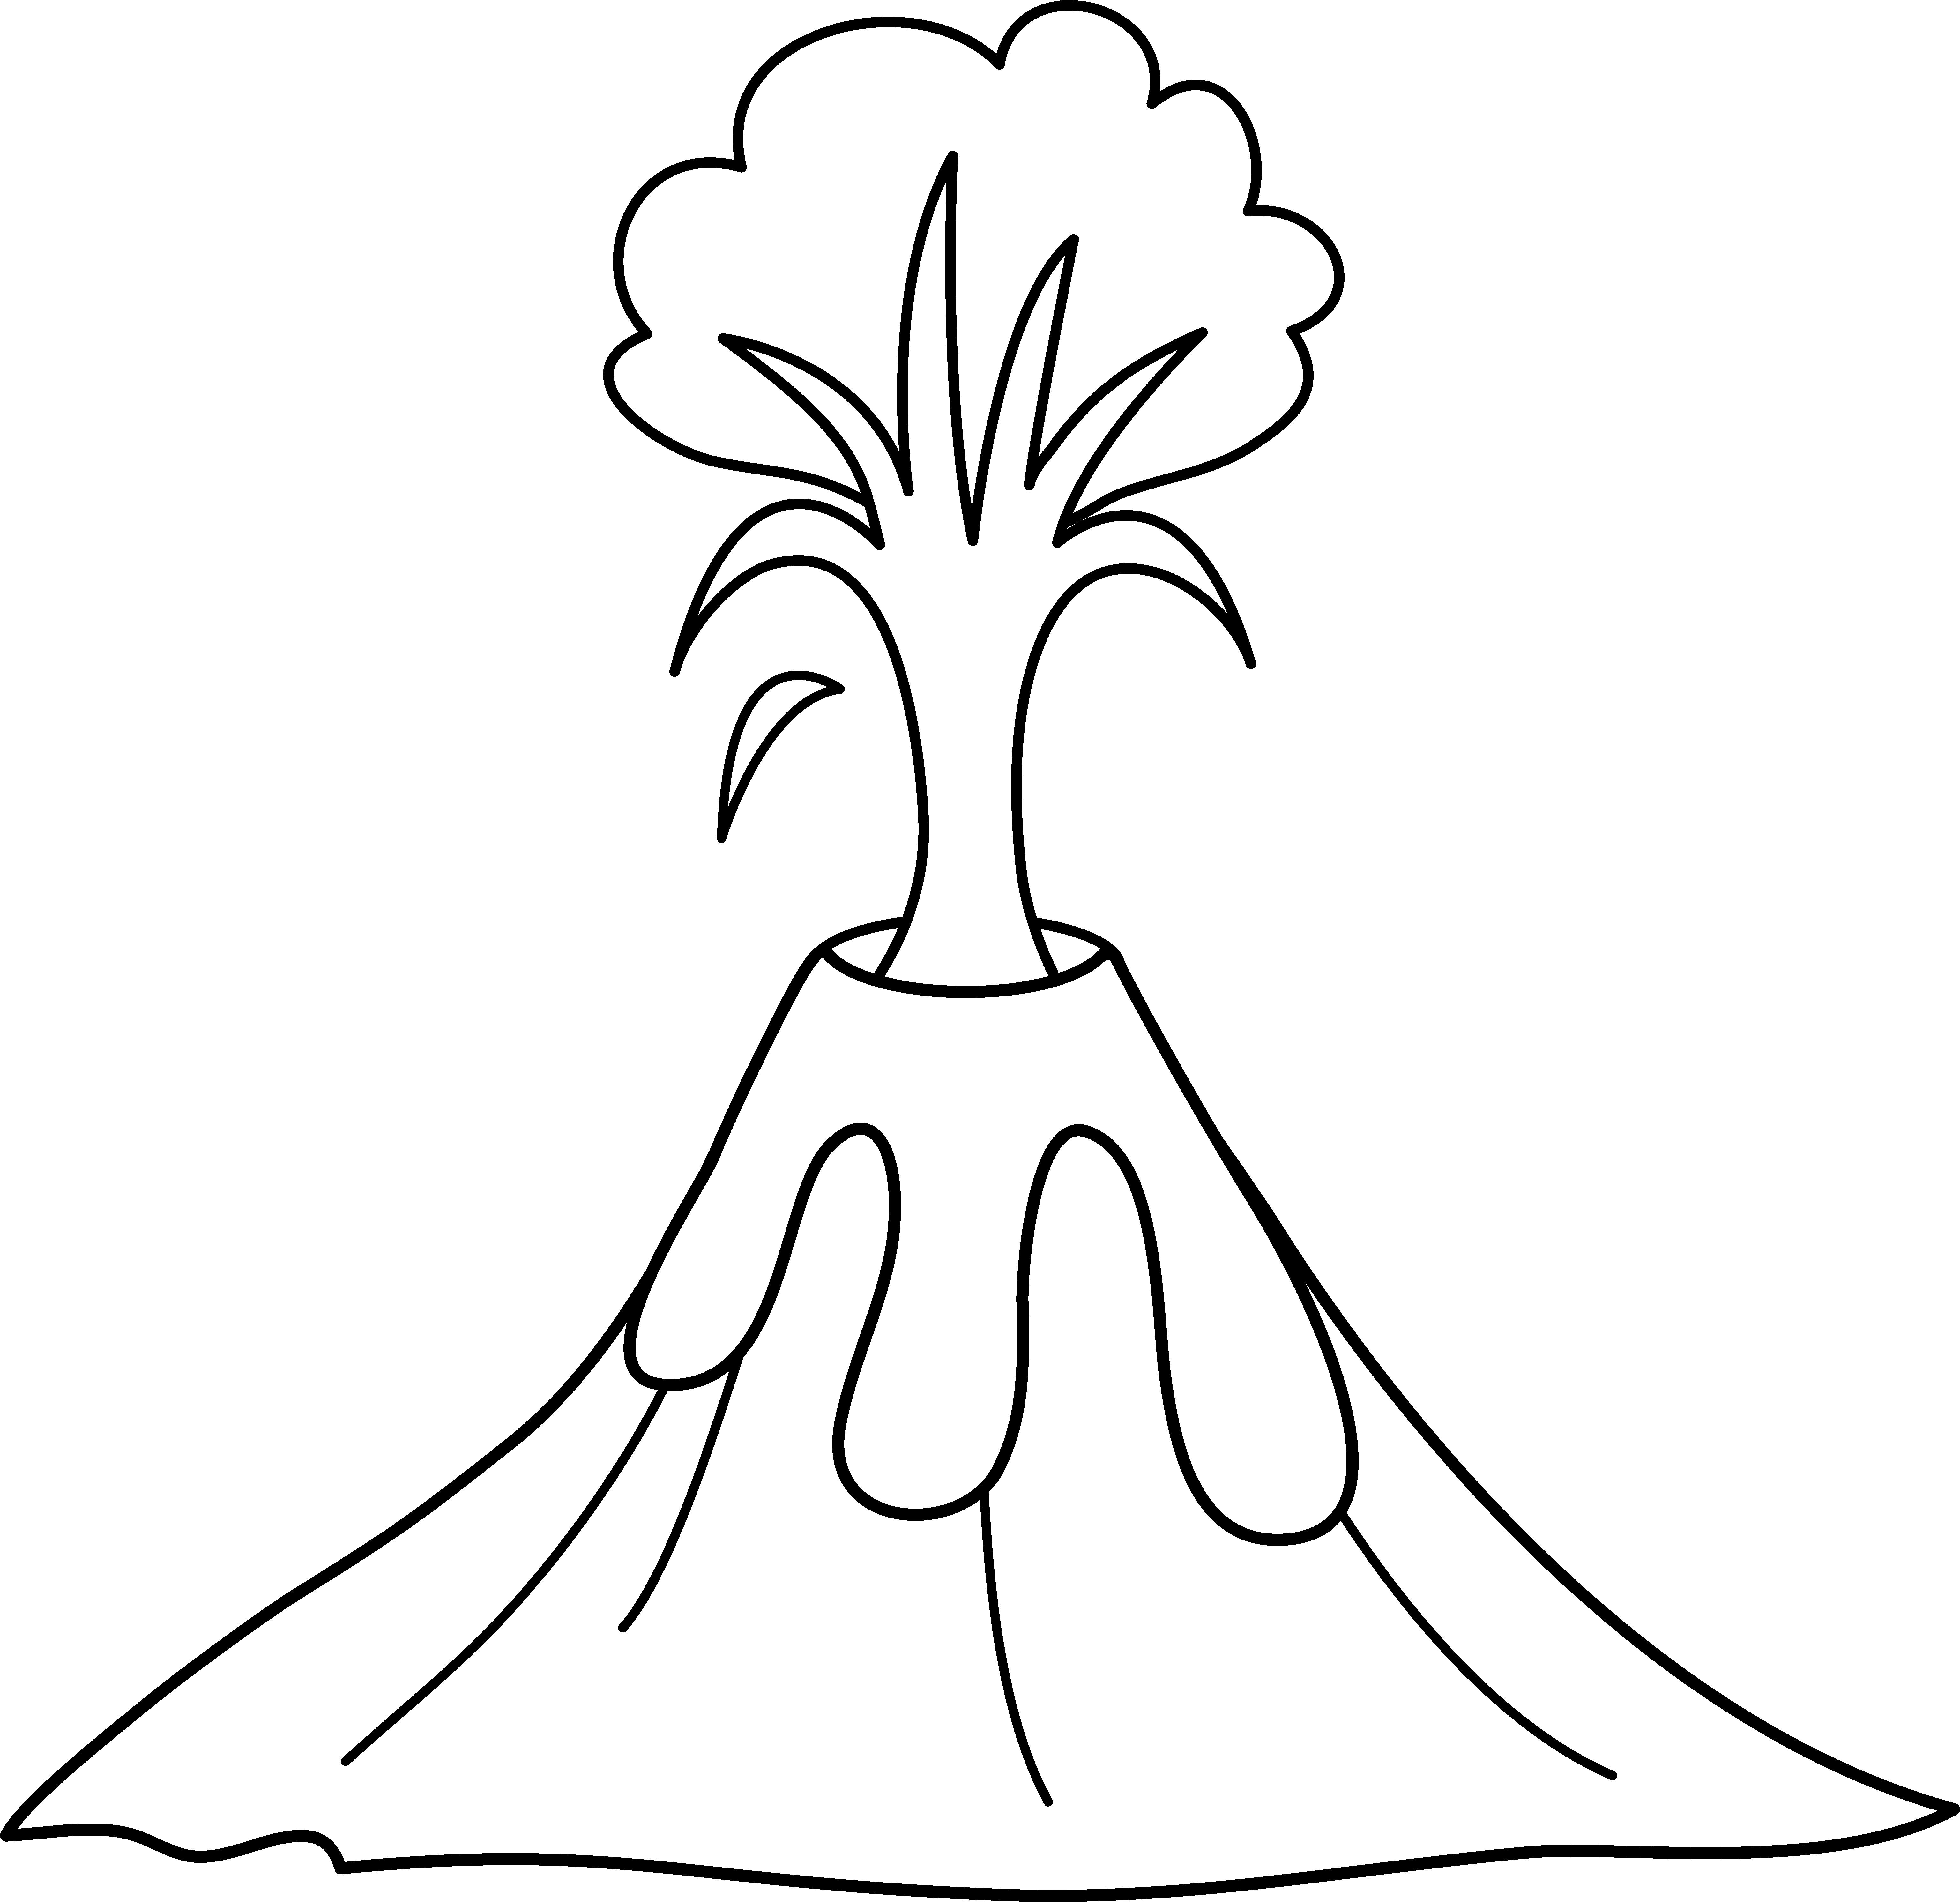  collection of erupting. Plant clipart land plant